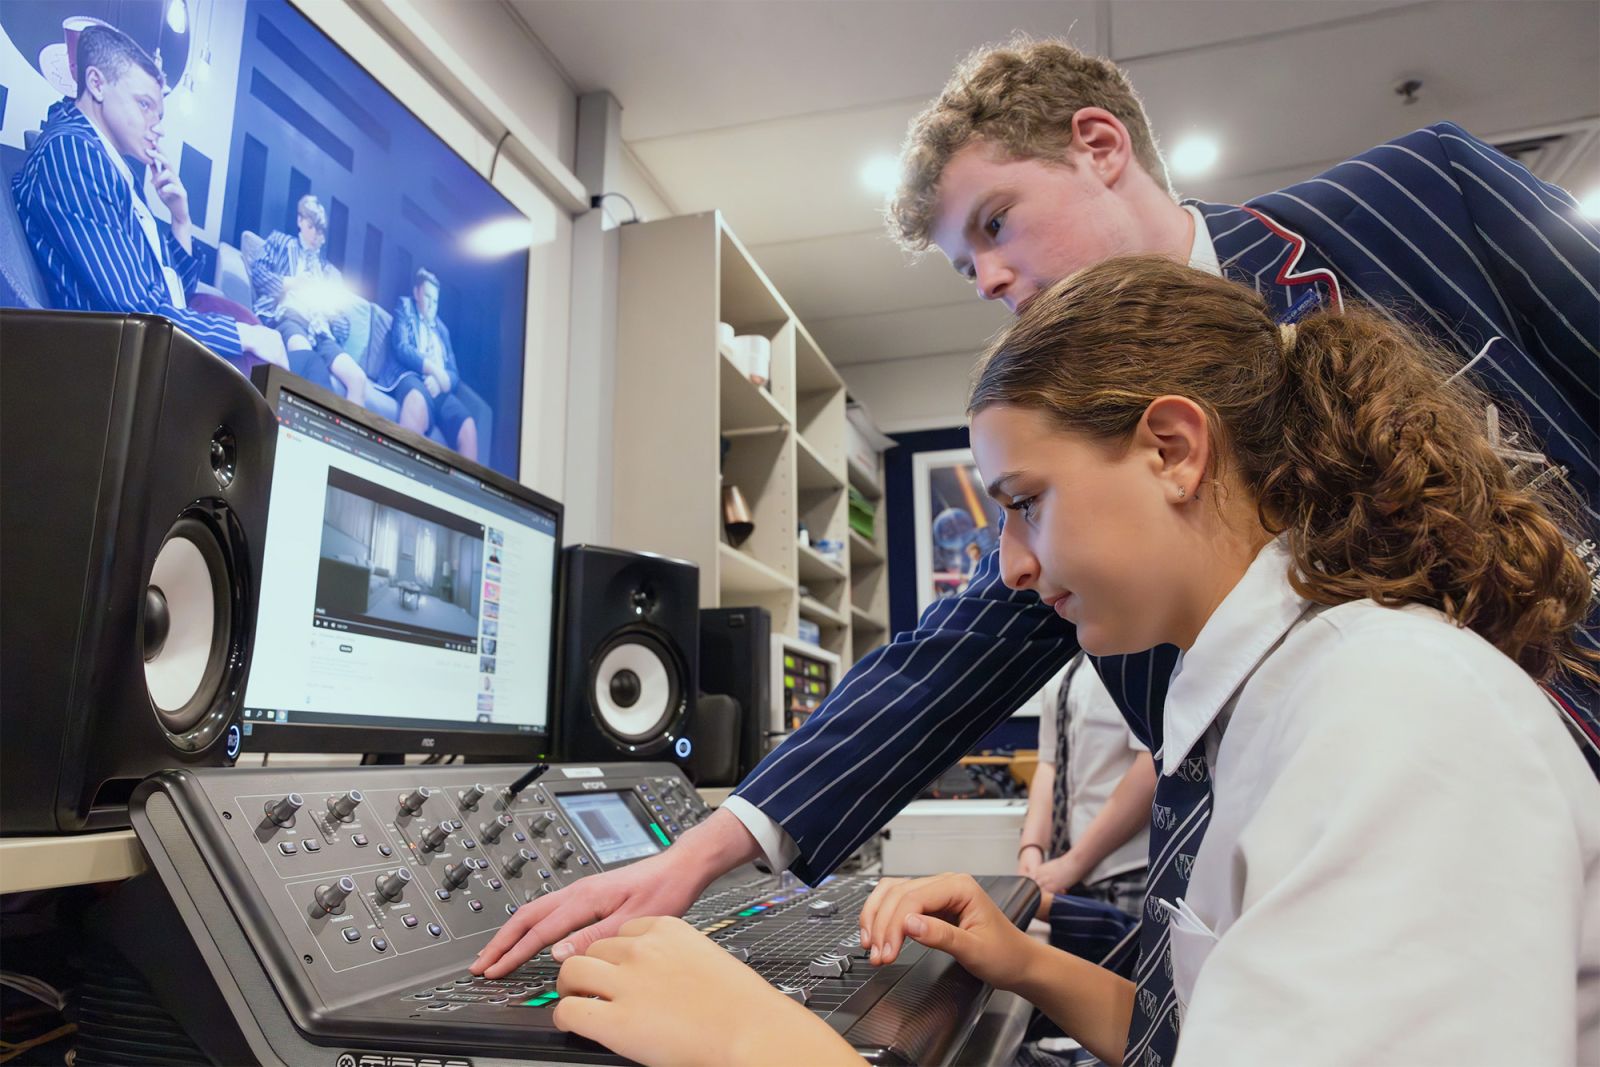 Students learning in the tv studio.